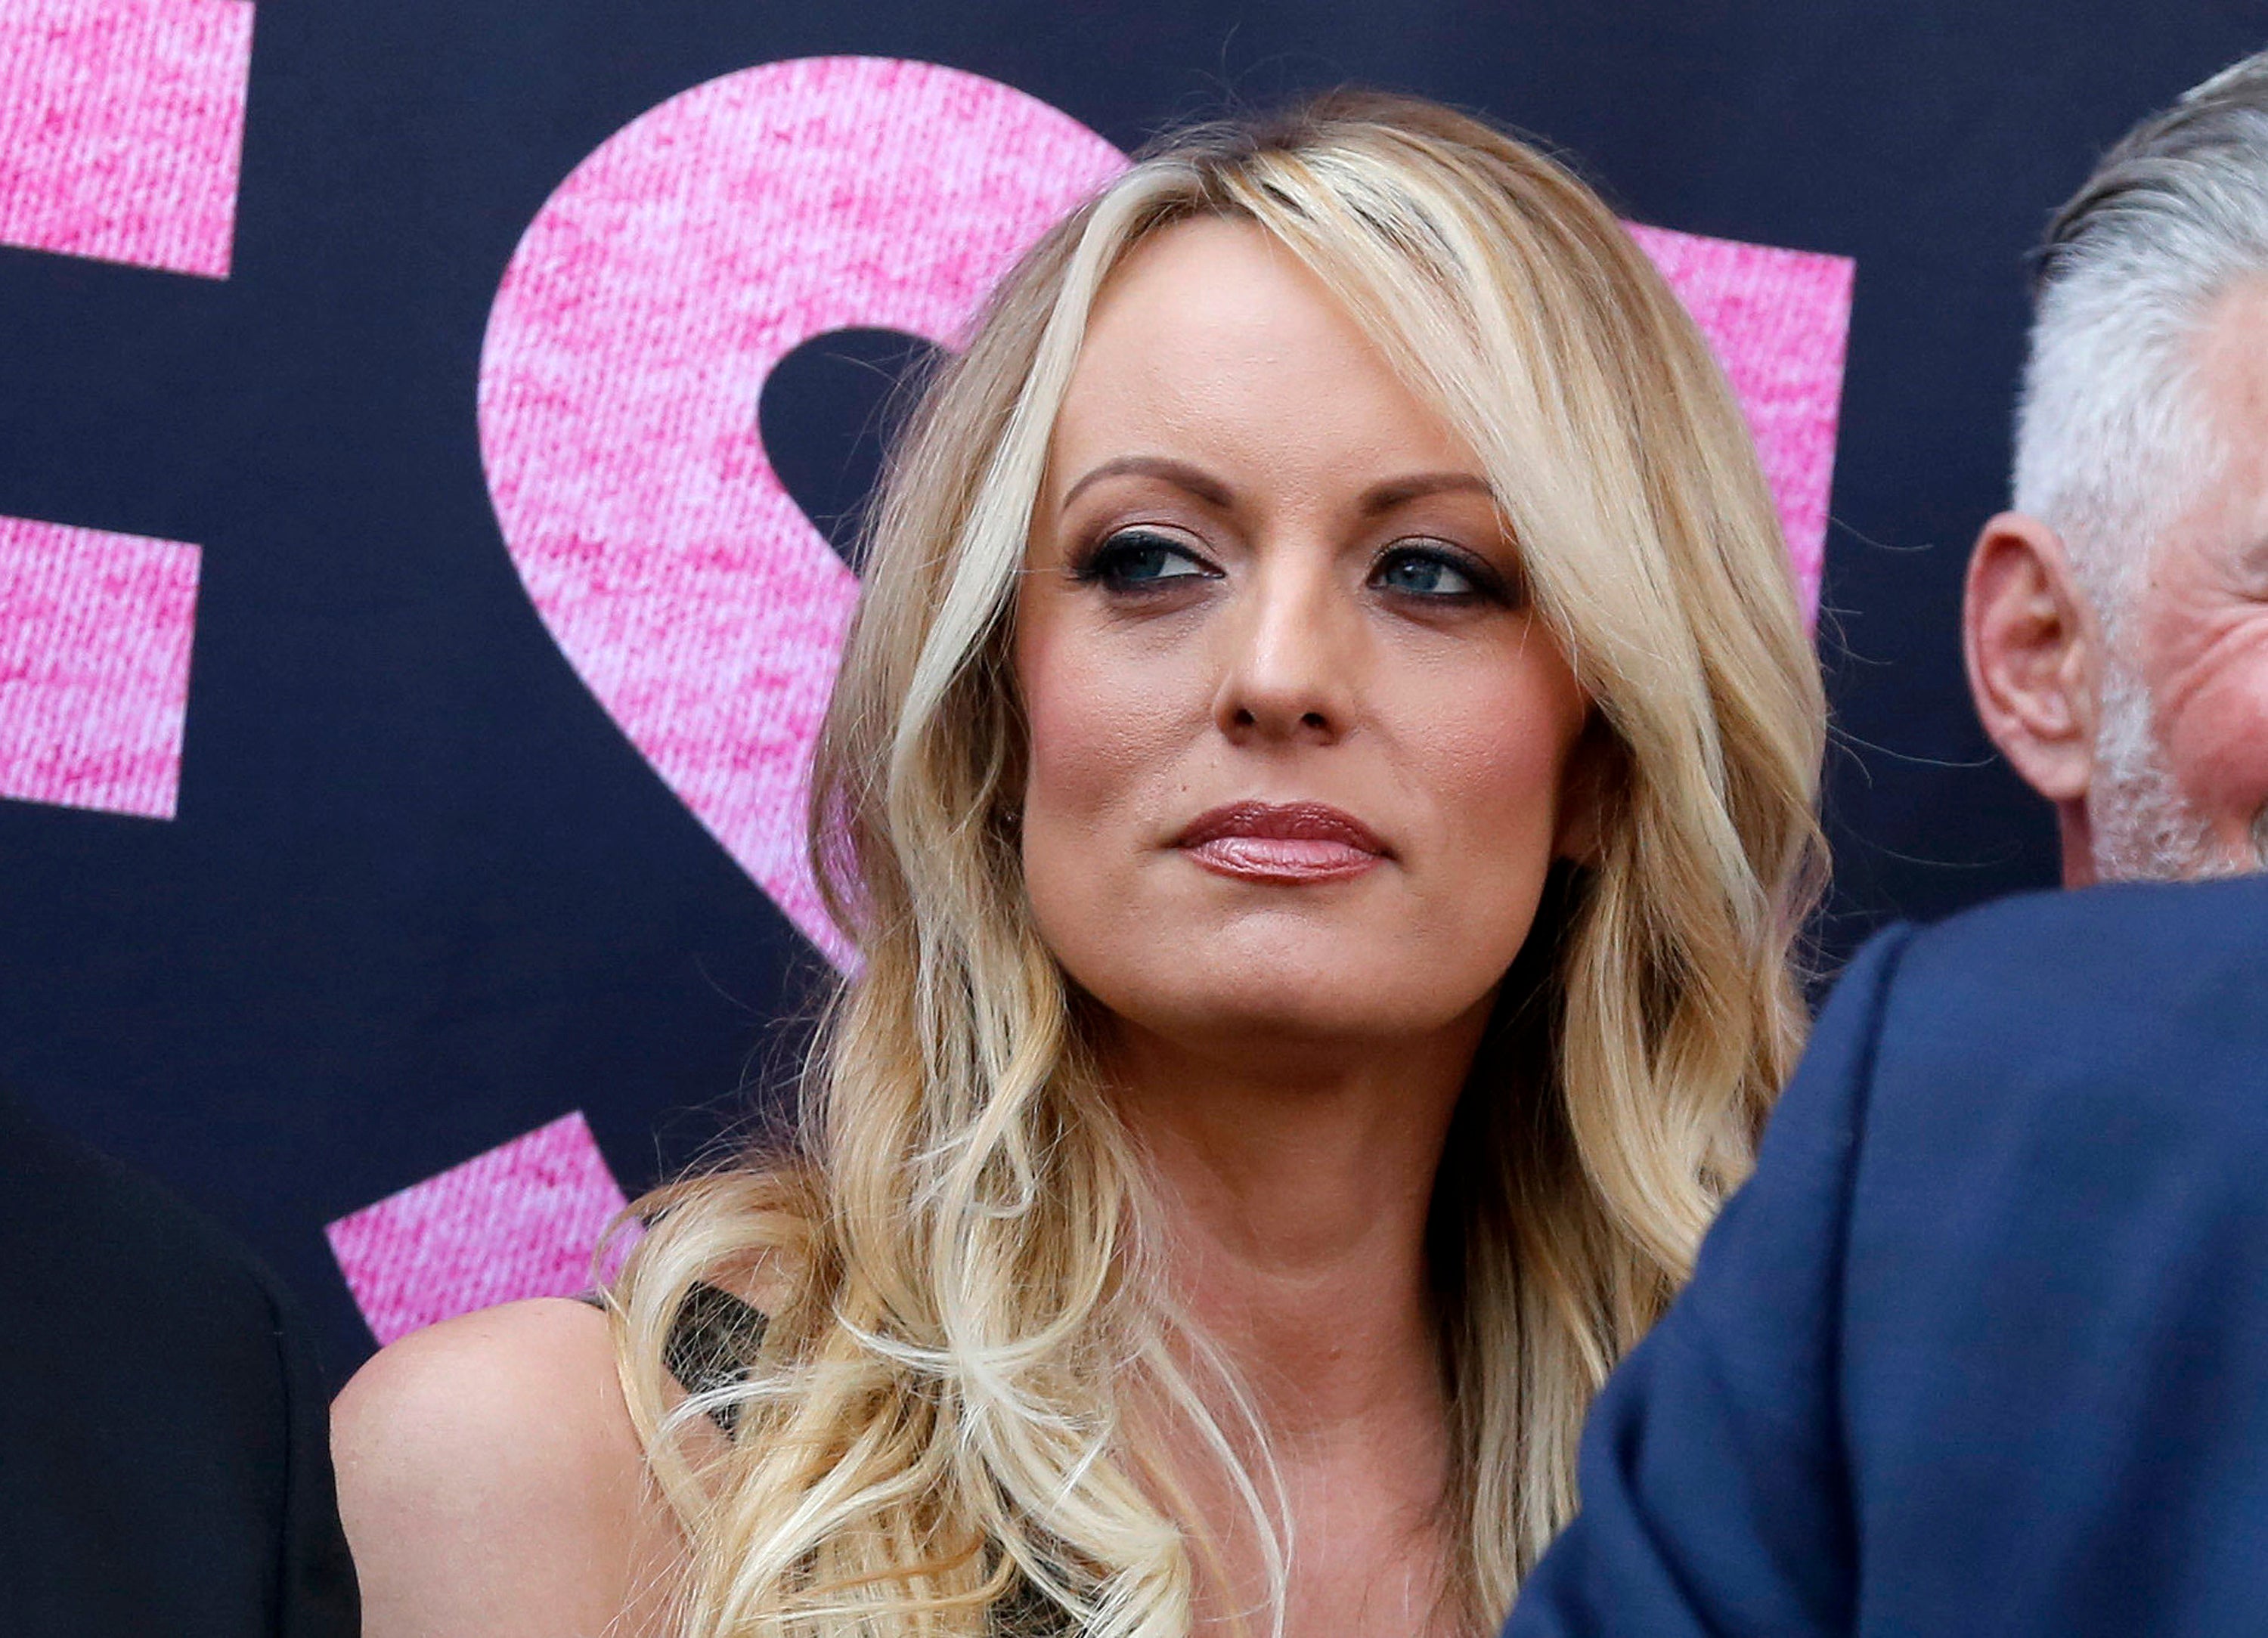 Stormy Daniels, pictured in 2018. Mr Trump allegedly paid her $130,000 to keep quiet about an affair ahead of the 2016 election. Mr Trump has denied the affair